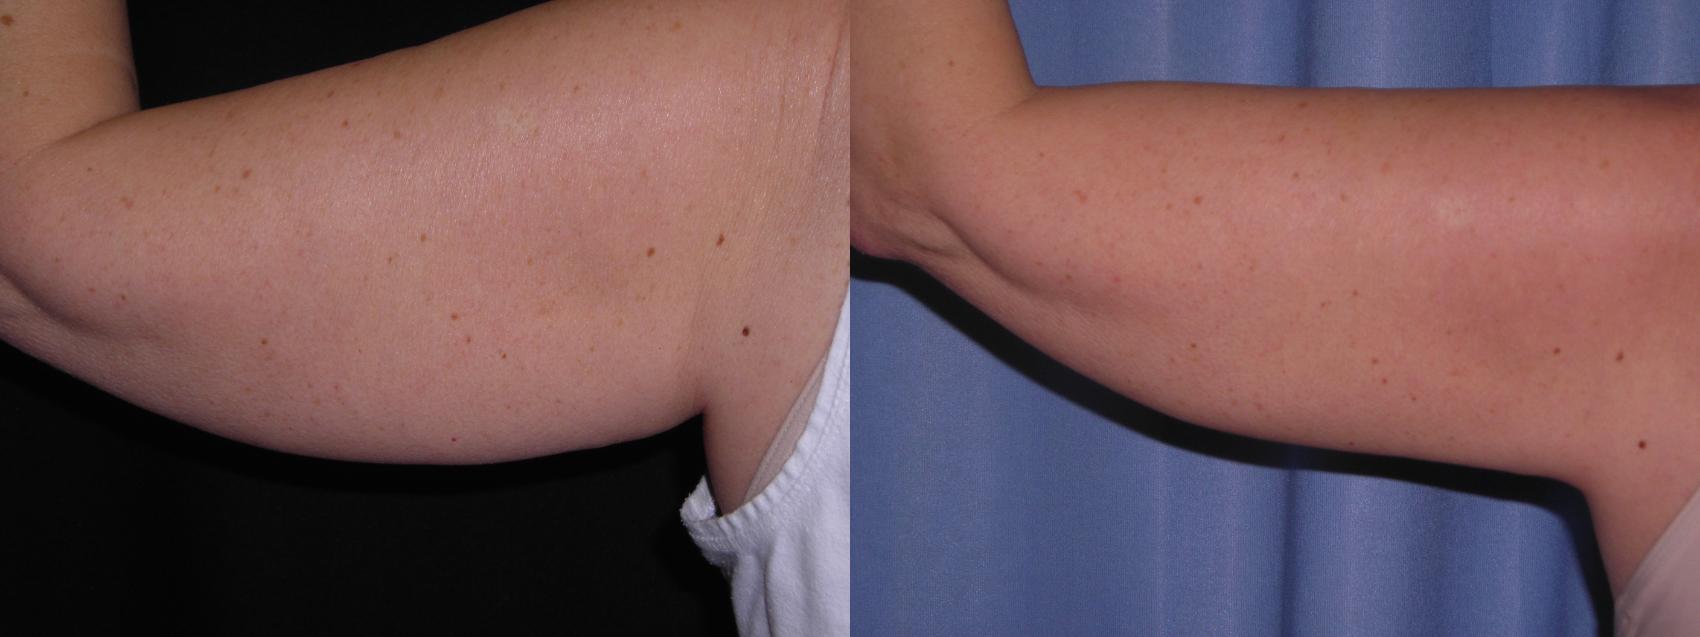 CoolSculpting® Before & After Photo | Marietta, GA | Plastic Surgery Center of the South